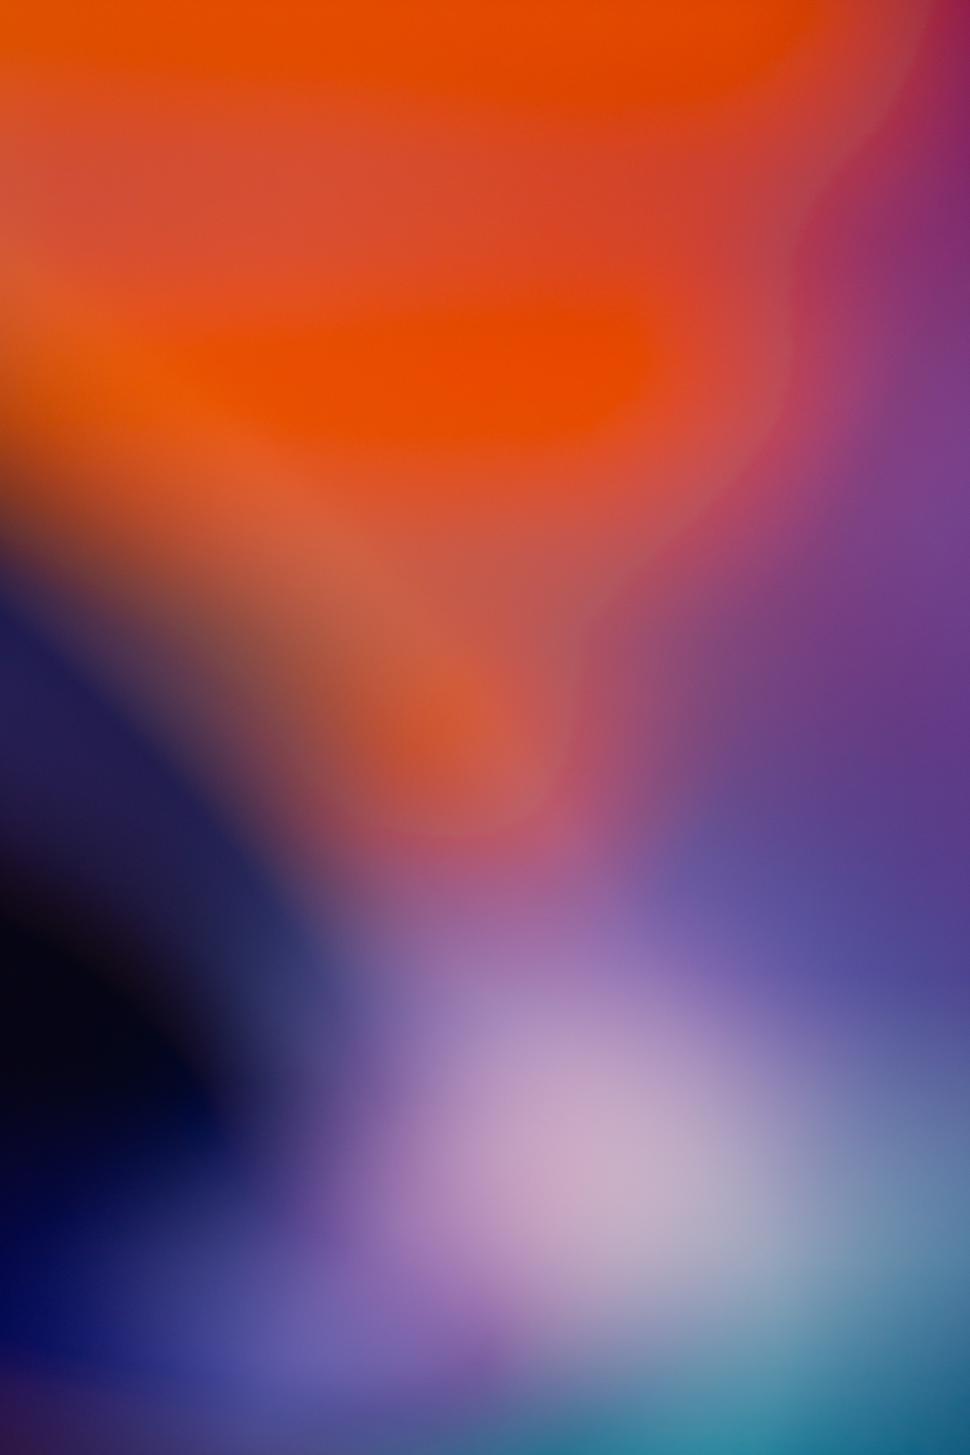 Free Image of A blurry image of a colorful background 